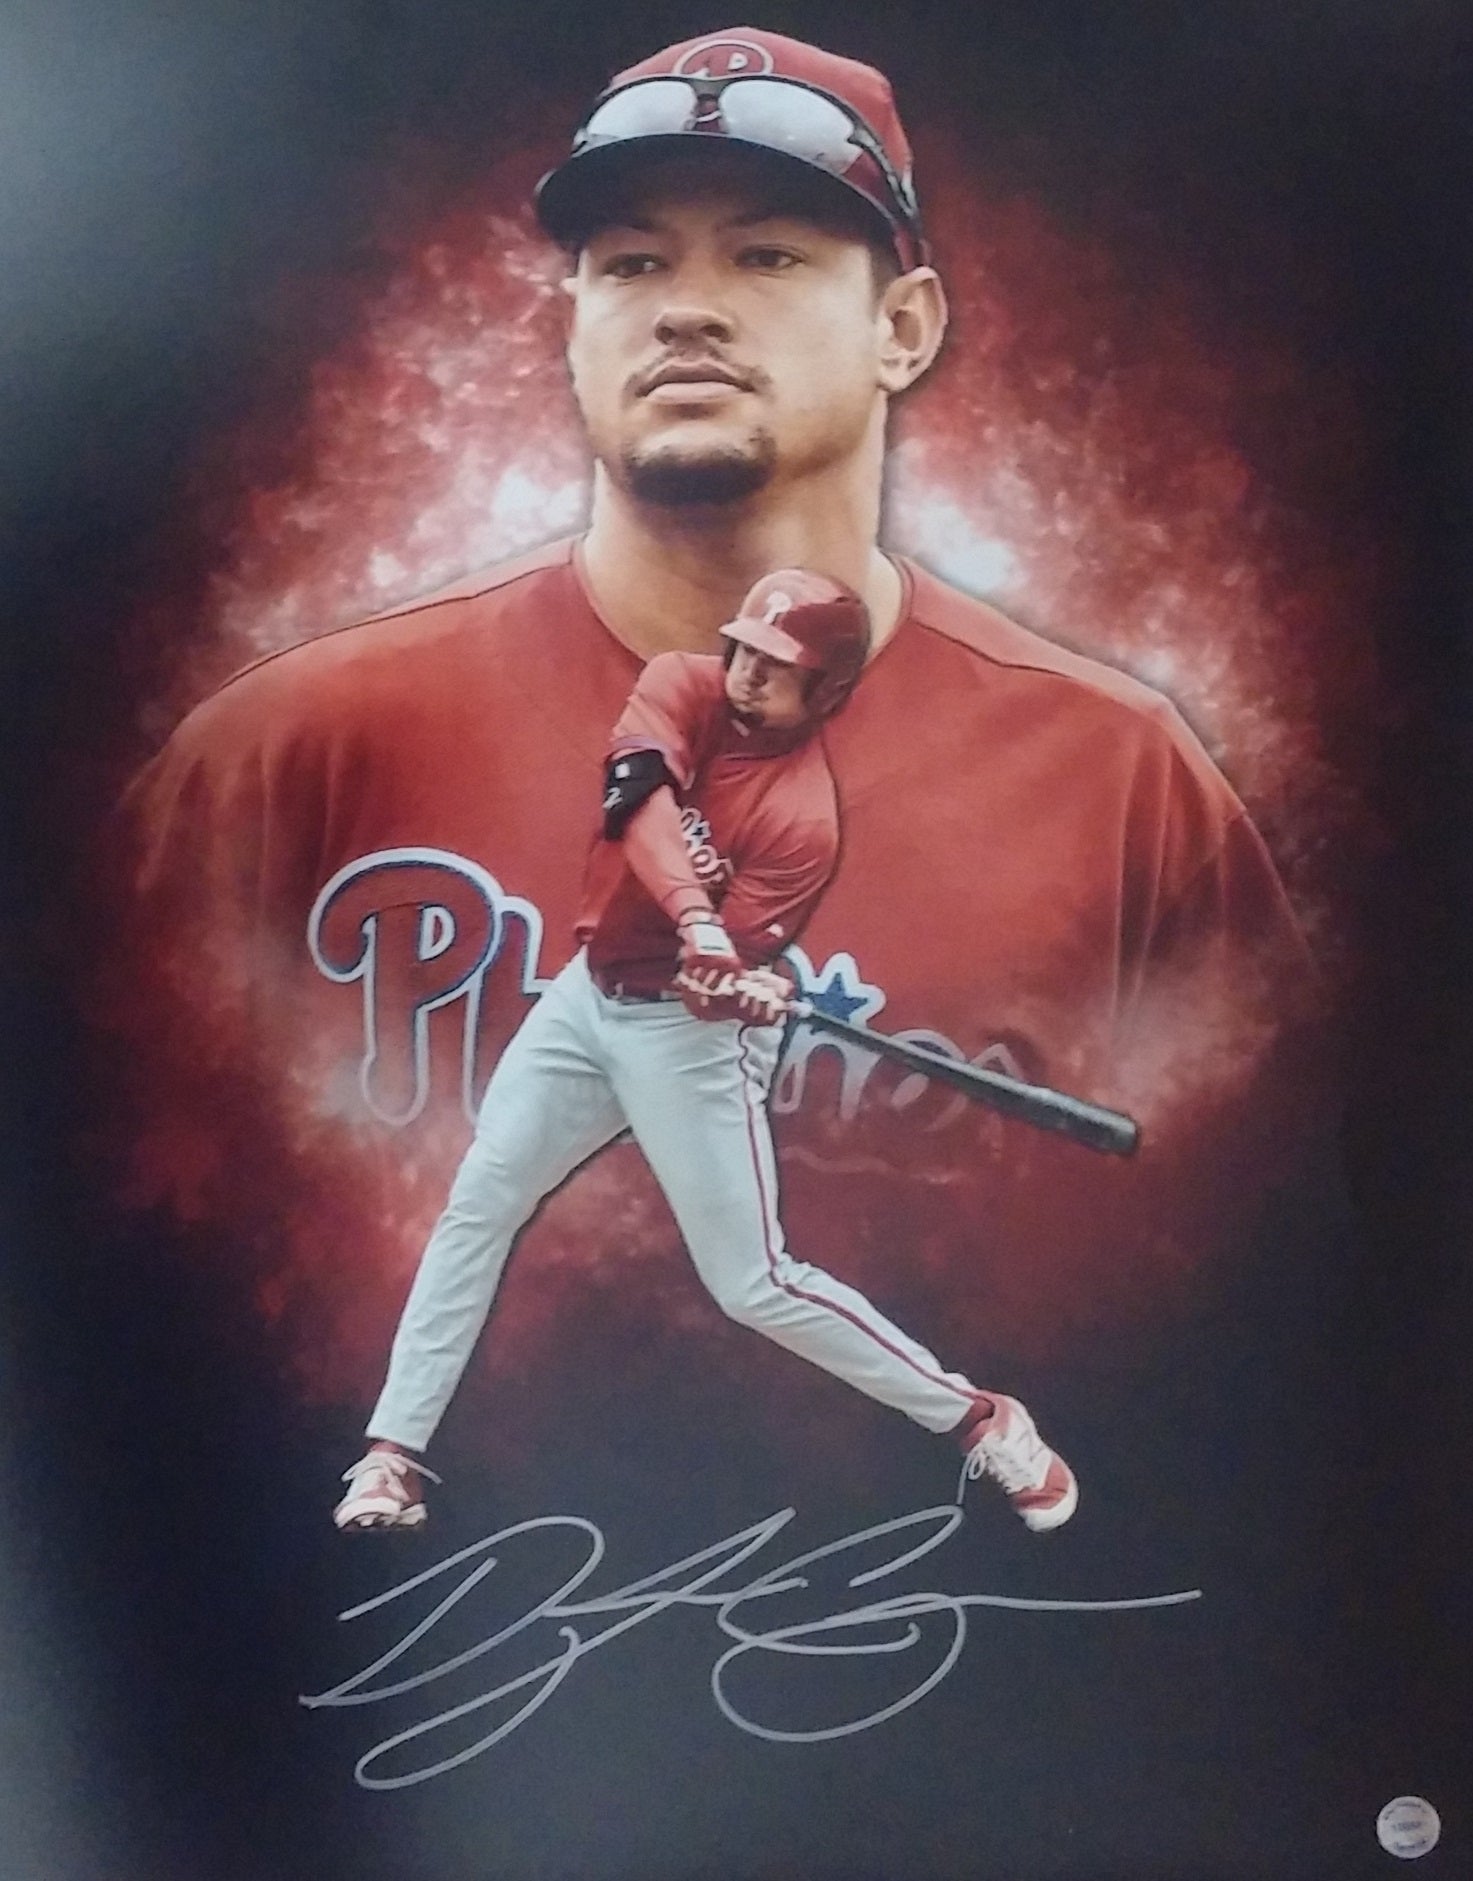 Dylan Cozens Blackout Collage Autographed Philadelphia Phillies 16" x 20" Baseball Photo - Dynasty Sports & Framing 